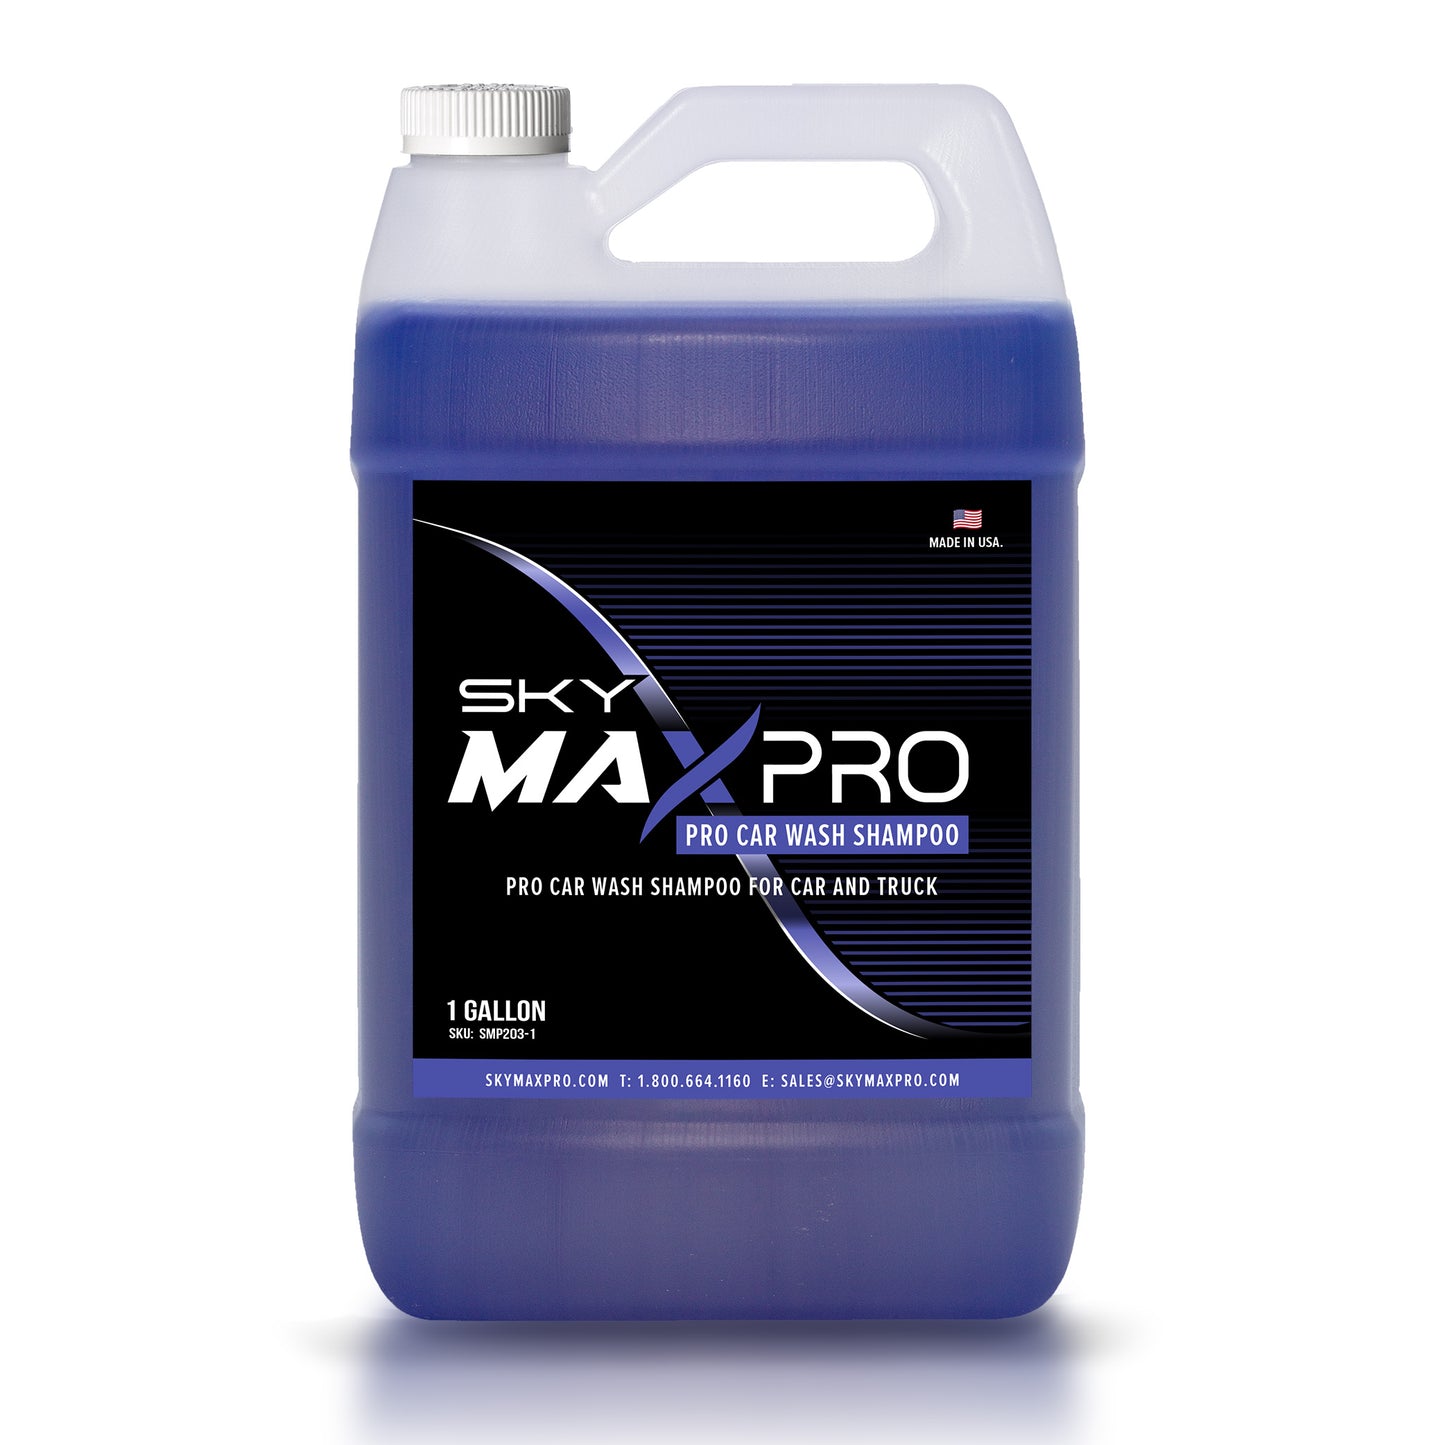 PRO Wet-Foam Wash for Car, Truck, RW and Boats Highly Concentrate, Biodegradable Aircraft Quality Product